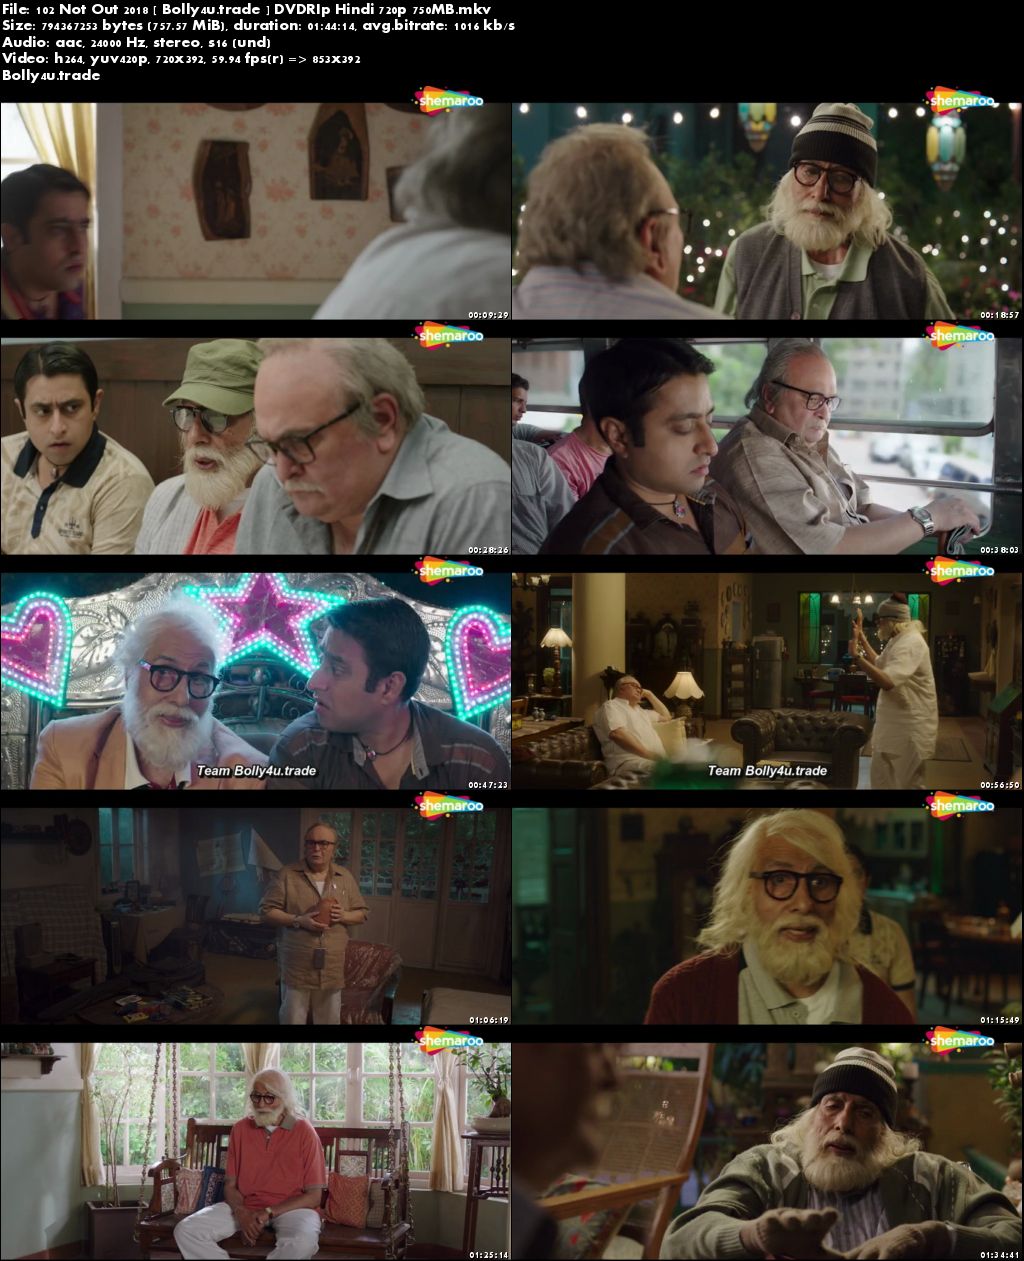 102 Not Out 2018 DVDRip 750MB Full Hindi Movie Download 720p